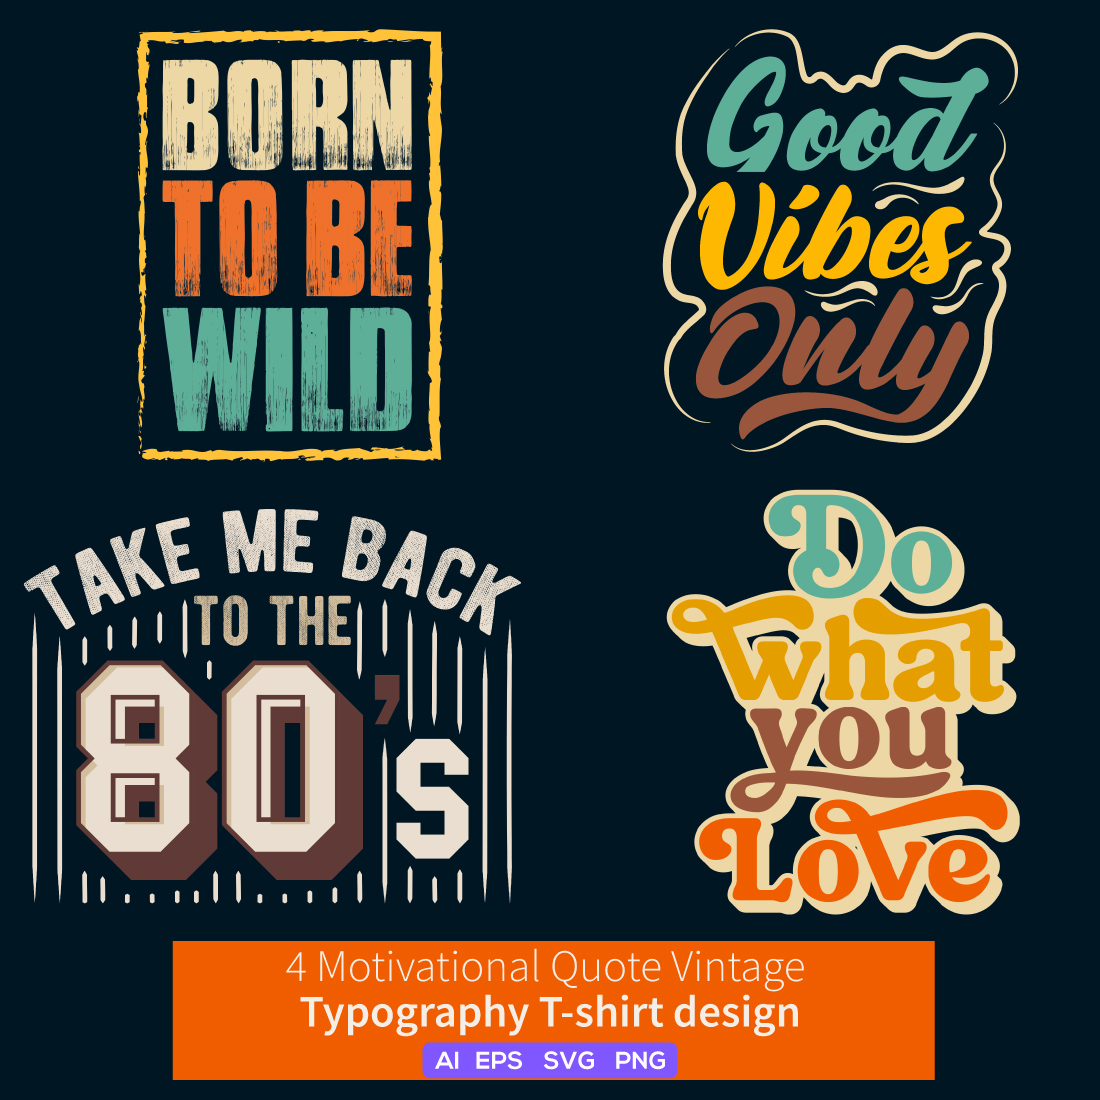 Find Your Inspiration with our Vintage Typography T-Shirt Bundle - Featuring Motivational Quotes and Retro Style cover image.